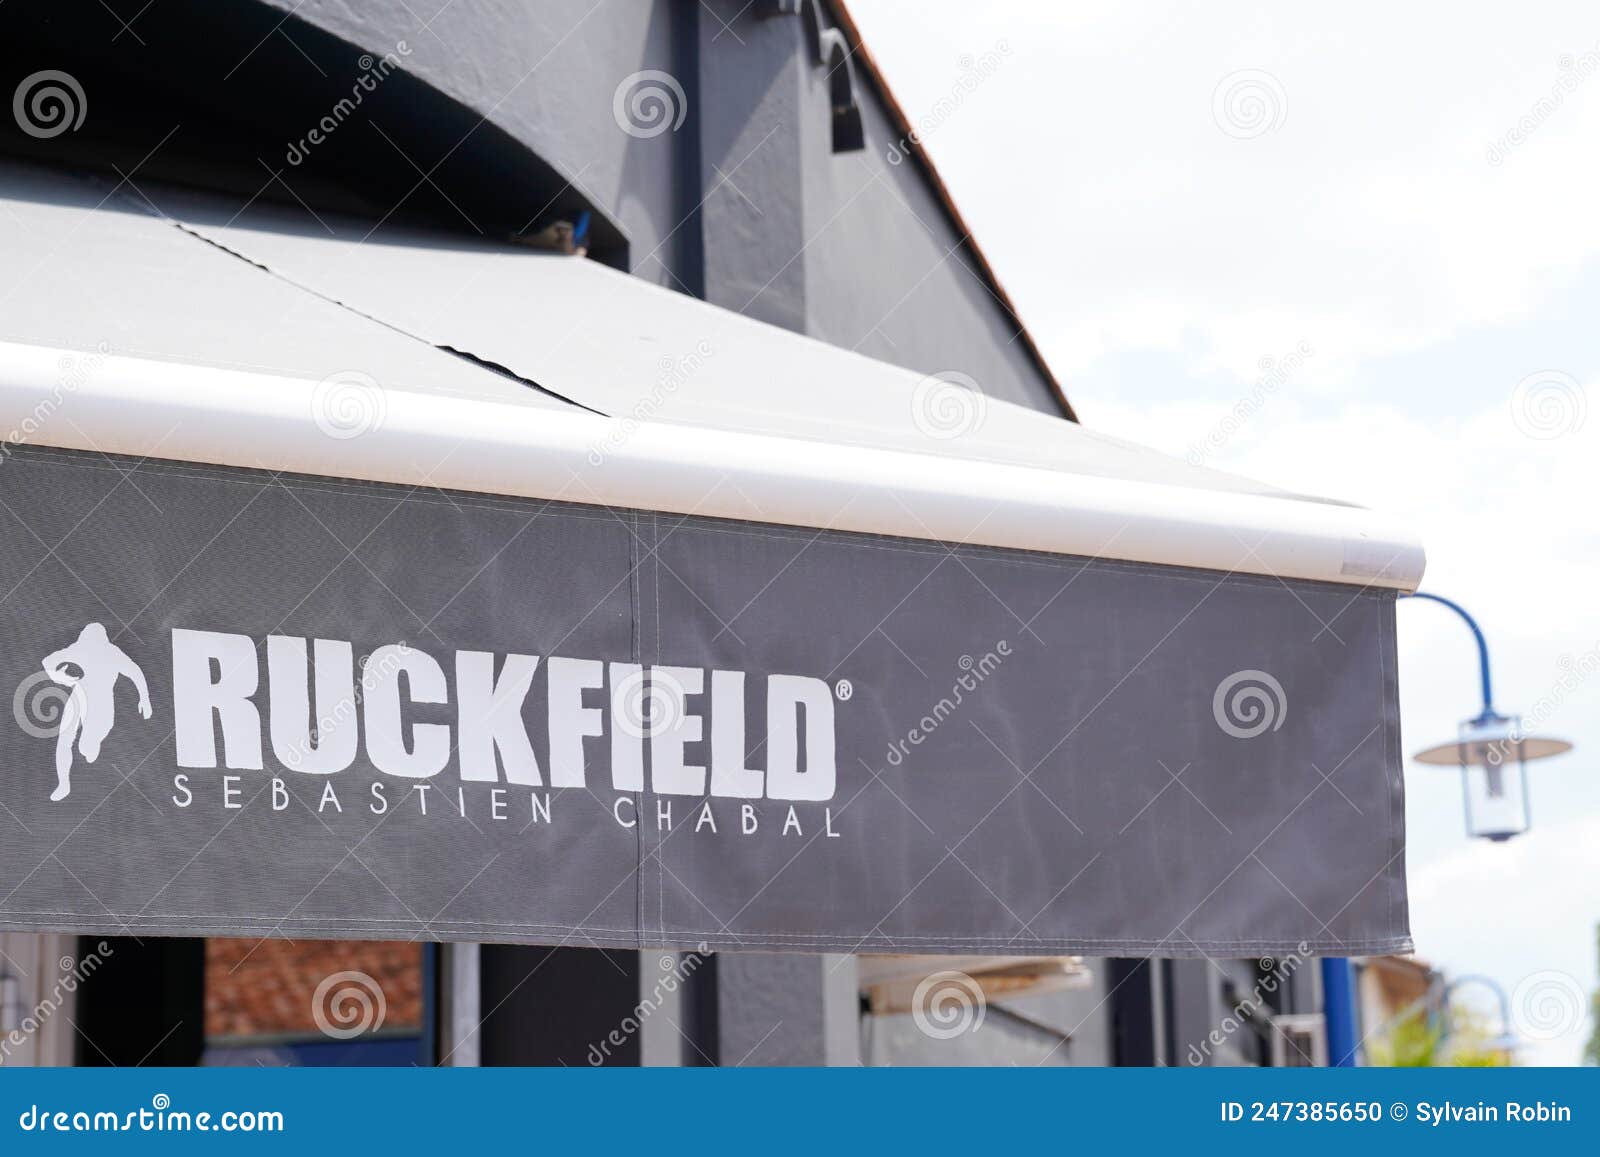 Ruckfield Sebastien Chabal Logo Text and Brand Shop Sign of Rugby ...